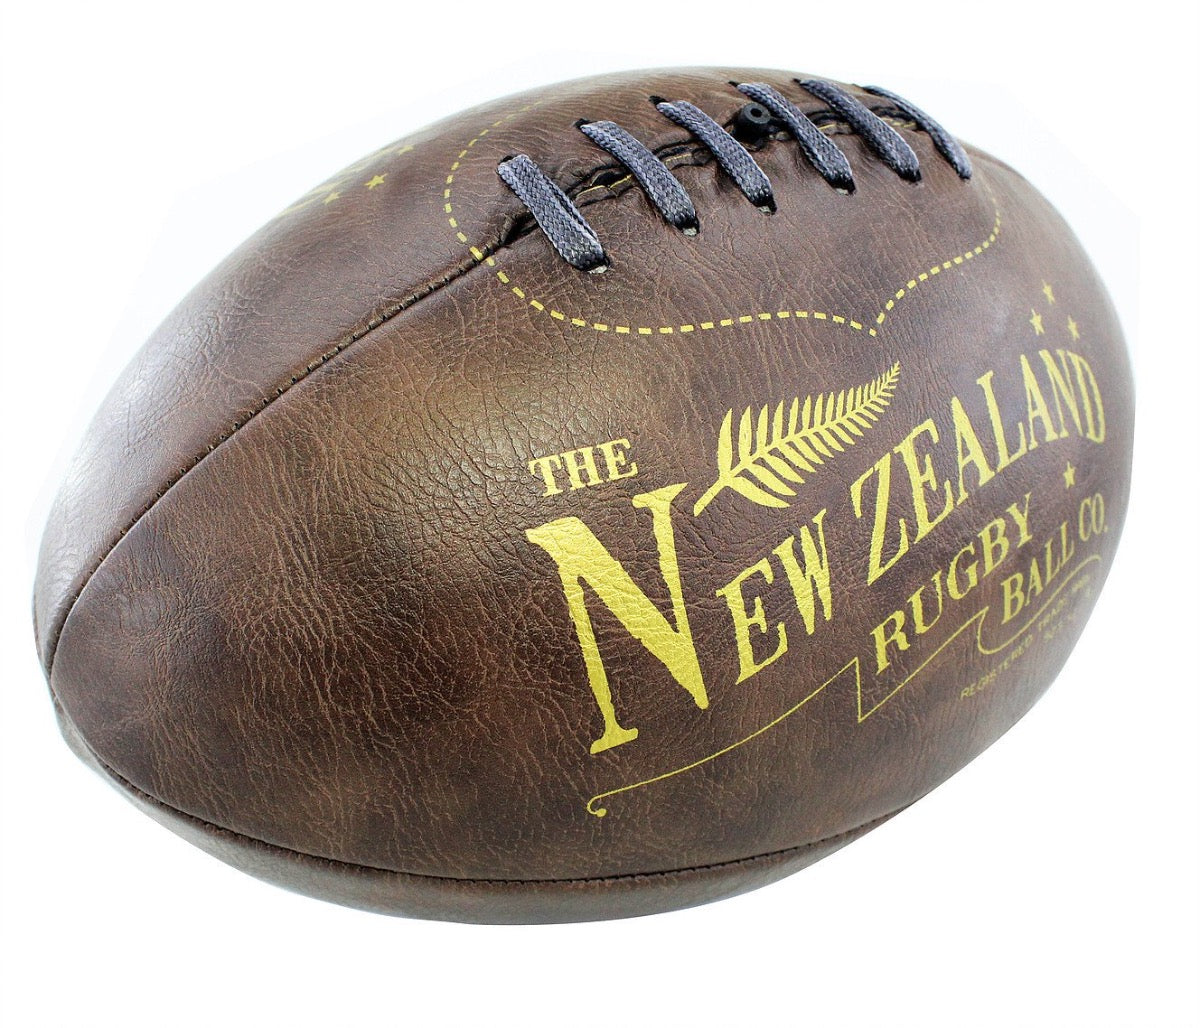 The New Zealand Rugby Ball